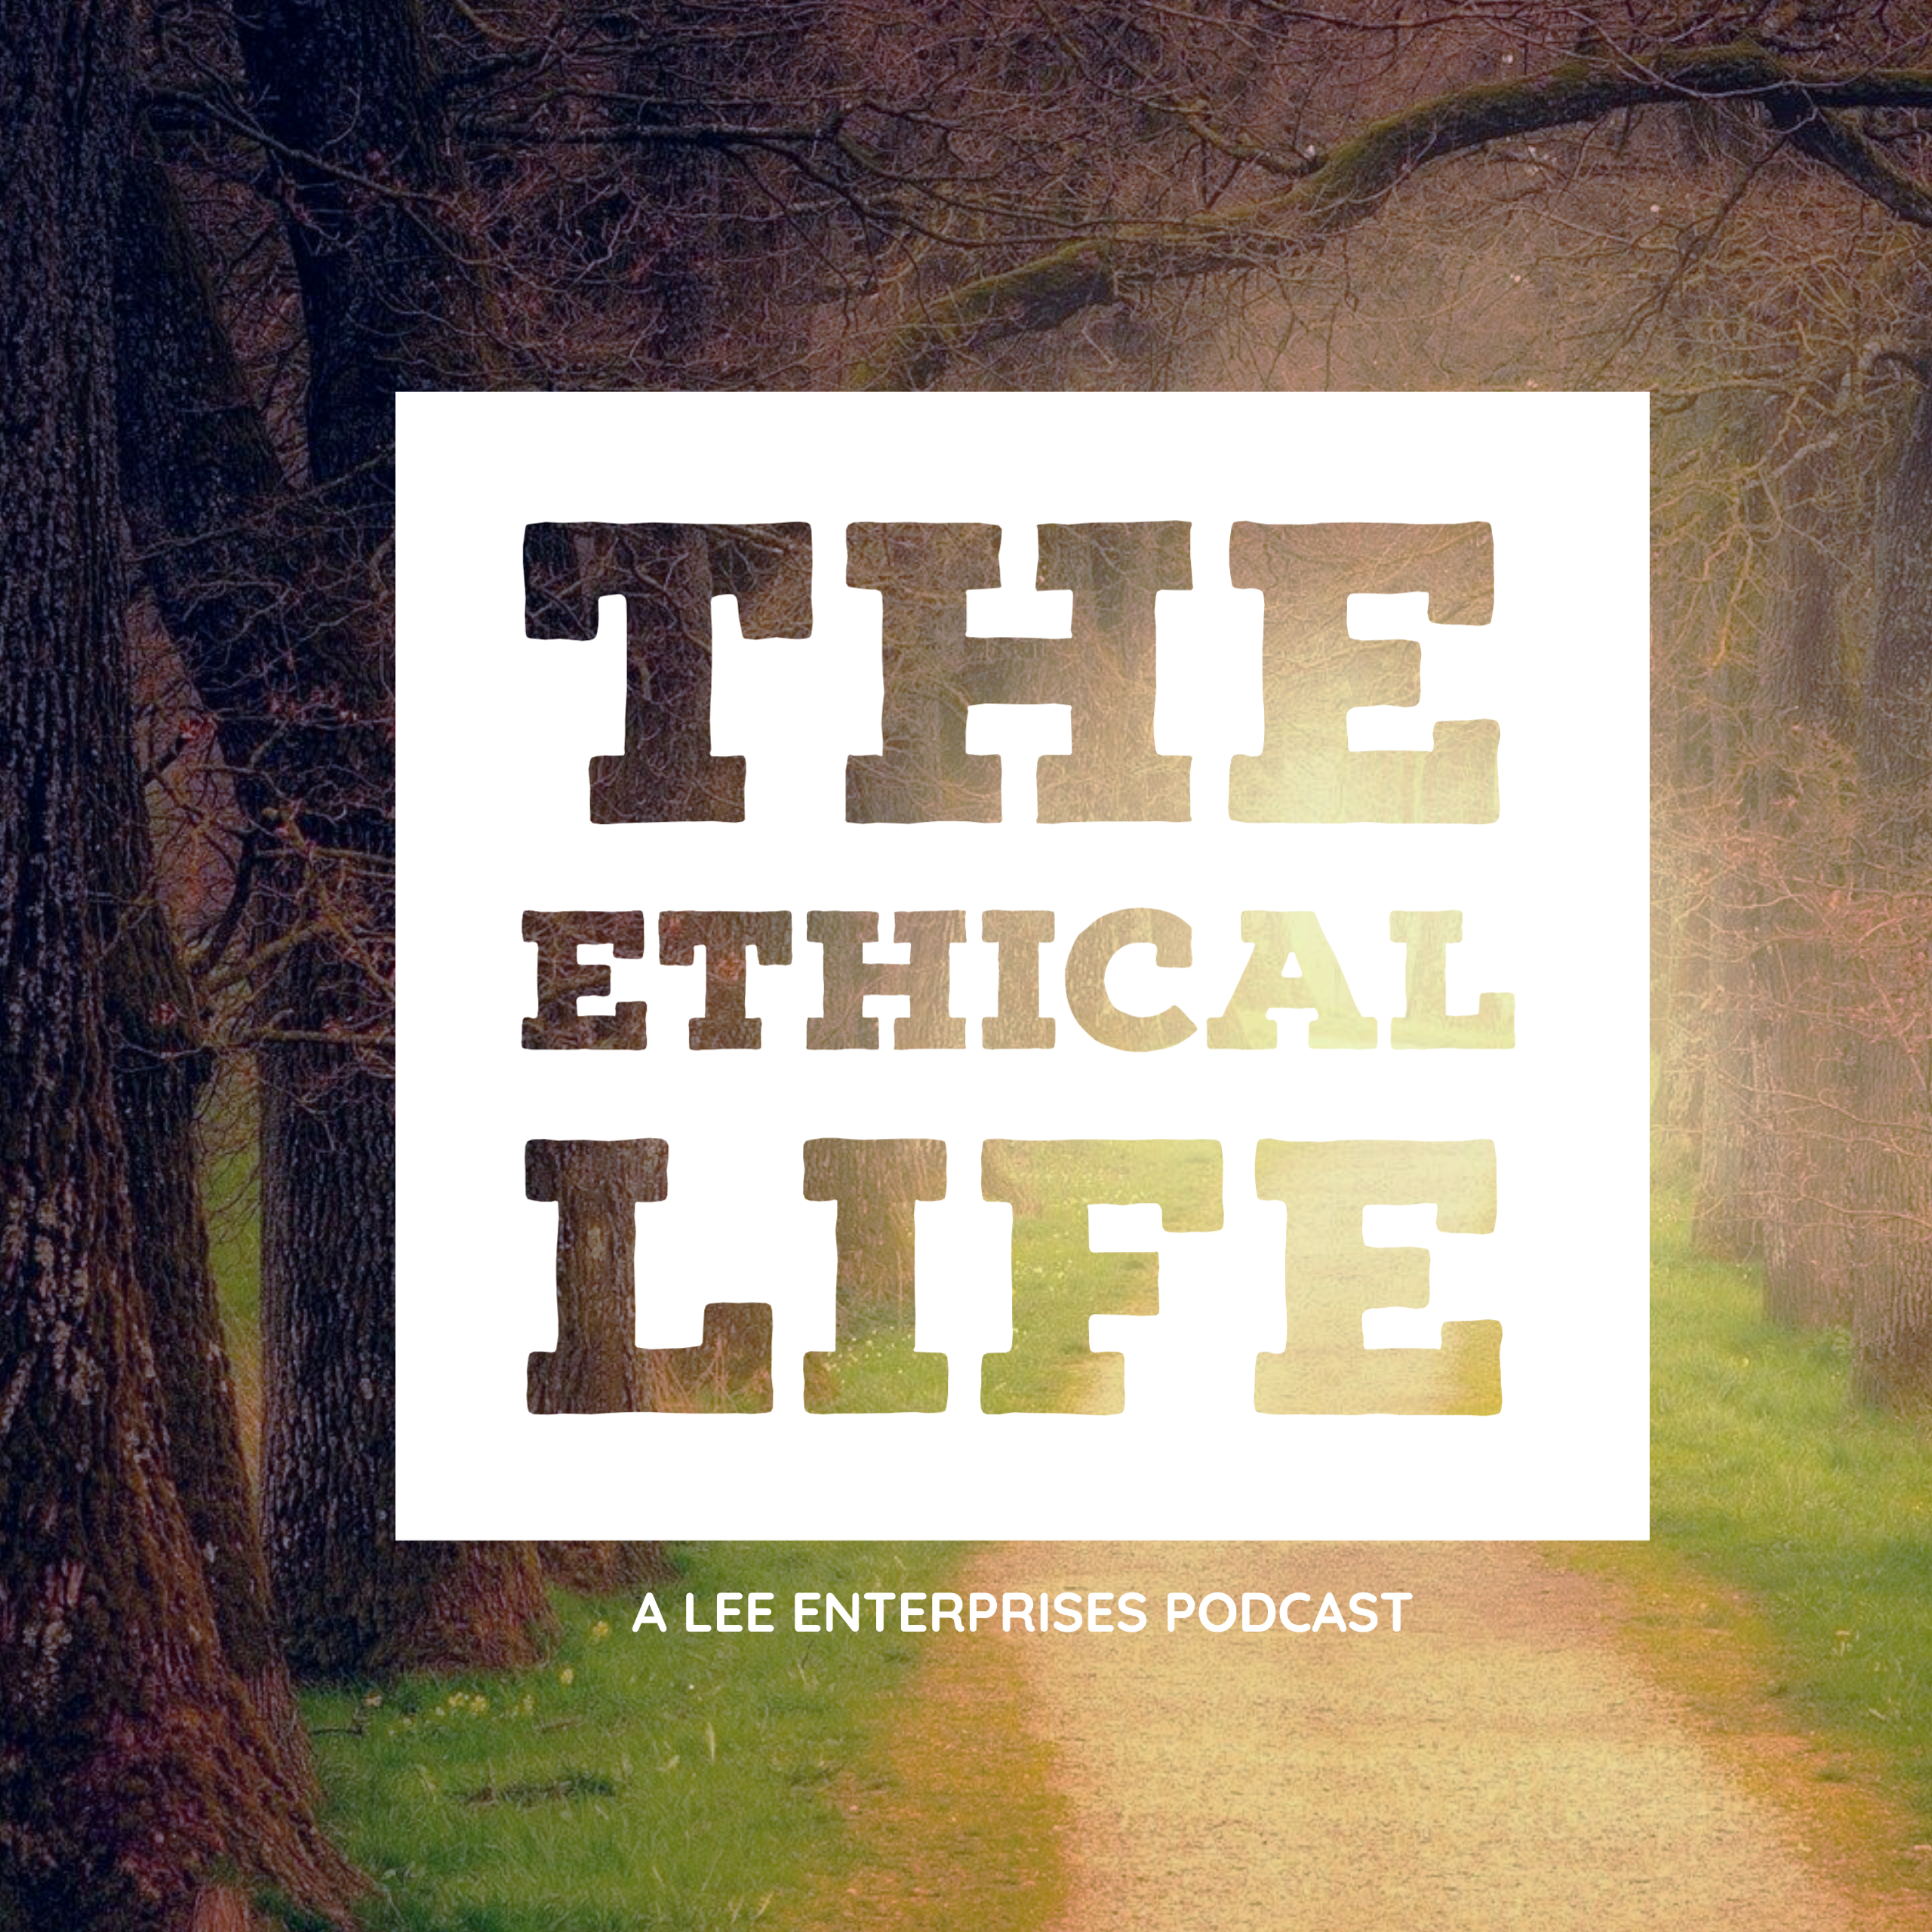 What would you do if you faced these four ethical dilemmas?